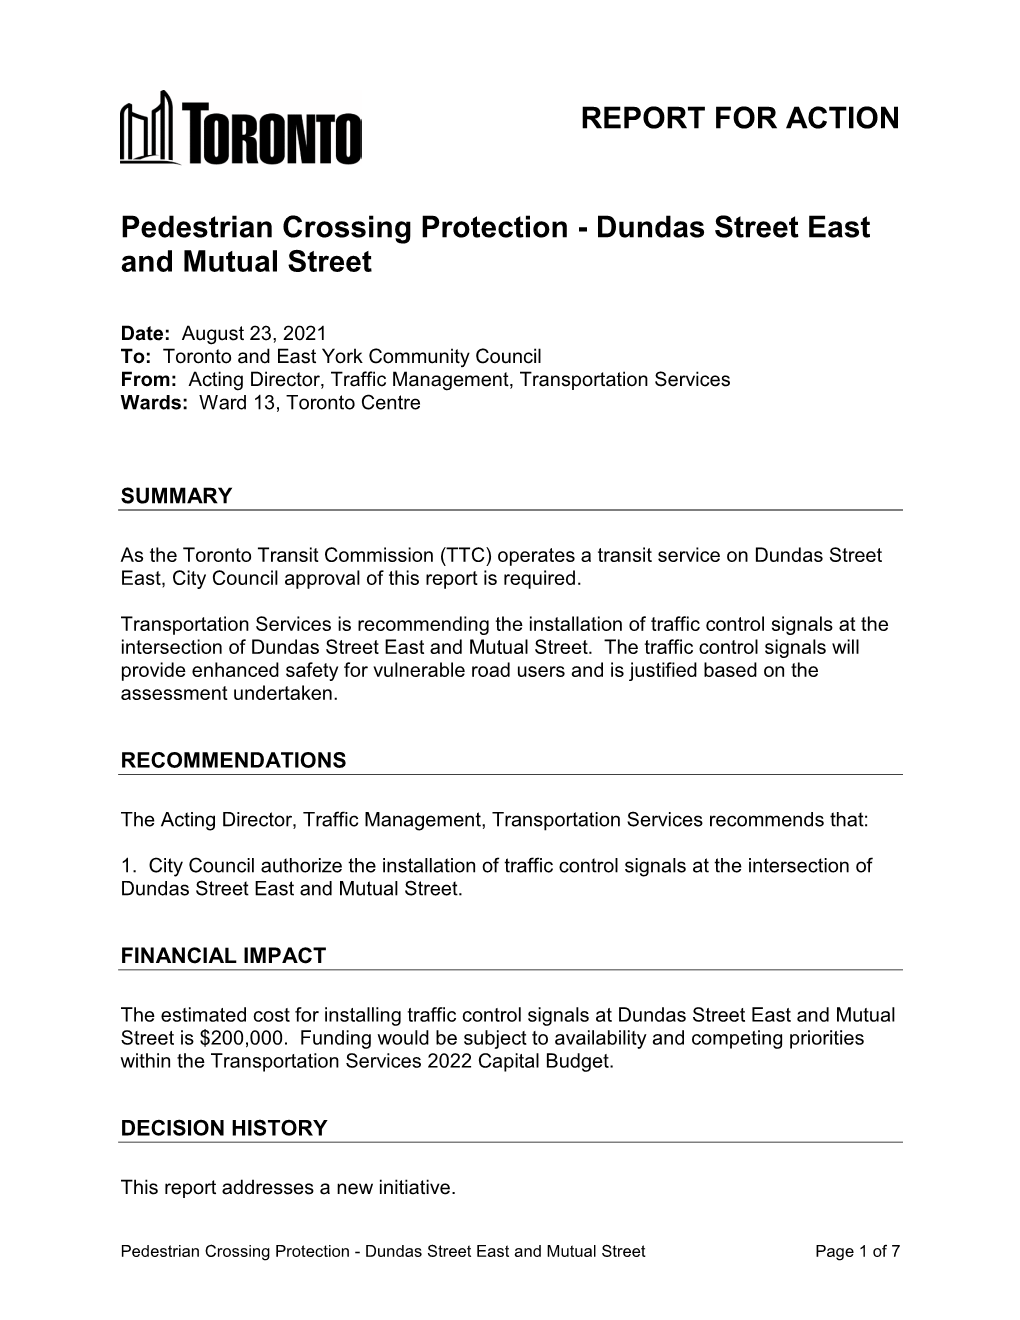 Pedestrian Crossing Protection - Dundas Street East and Mutual Street